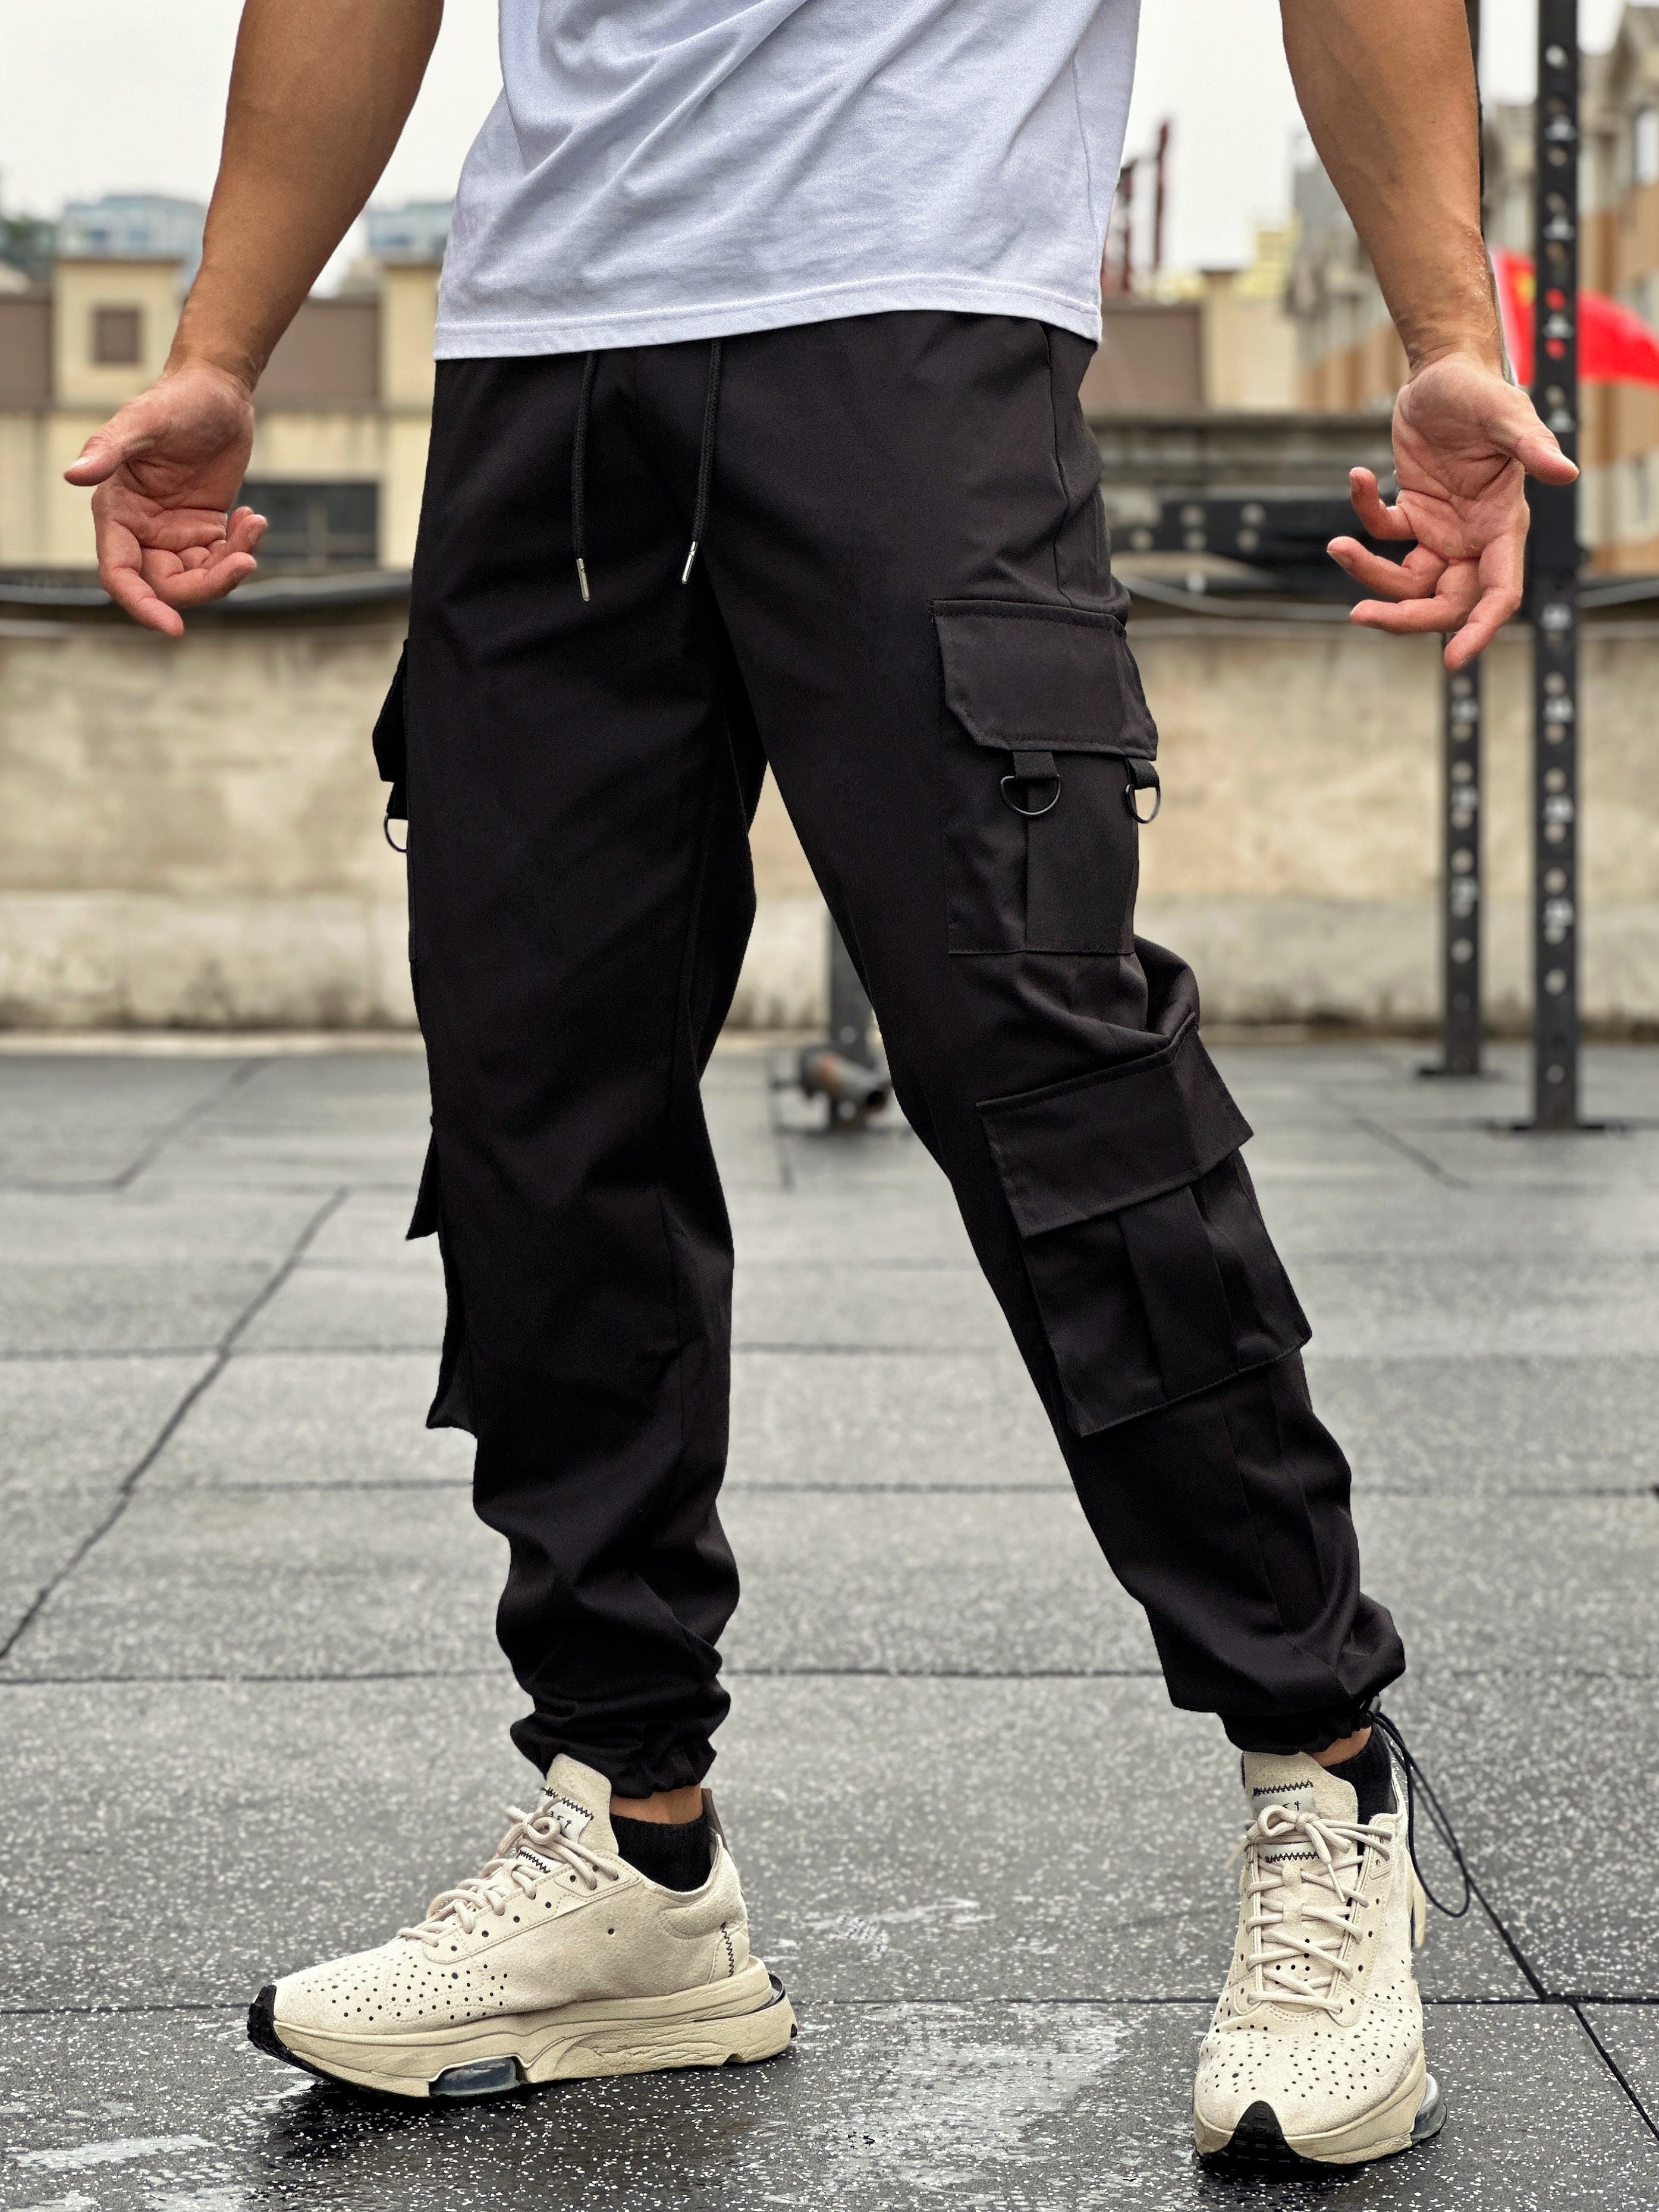 Black Satin Relaxed Cargo Pants